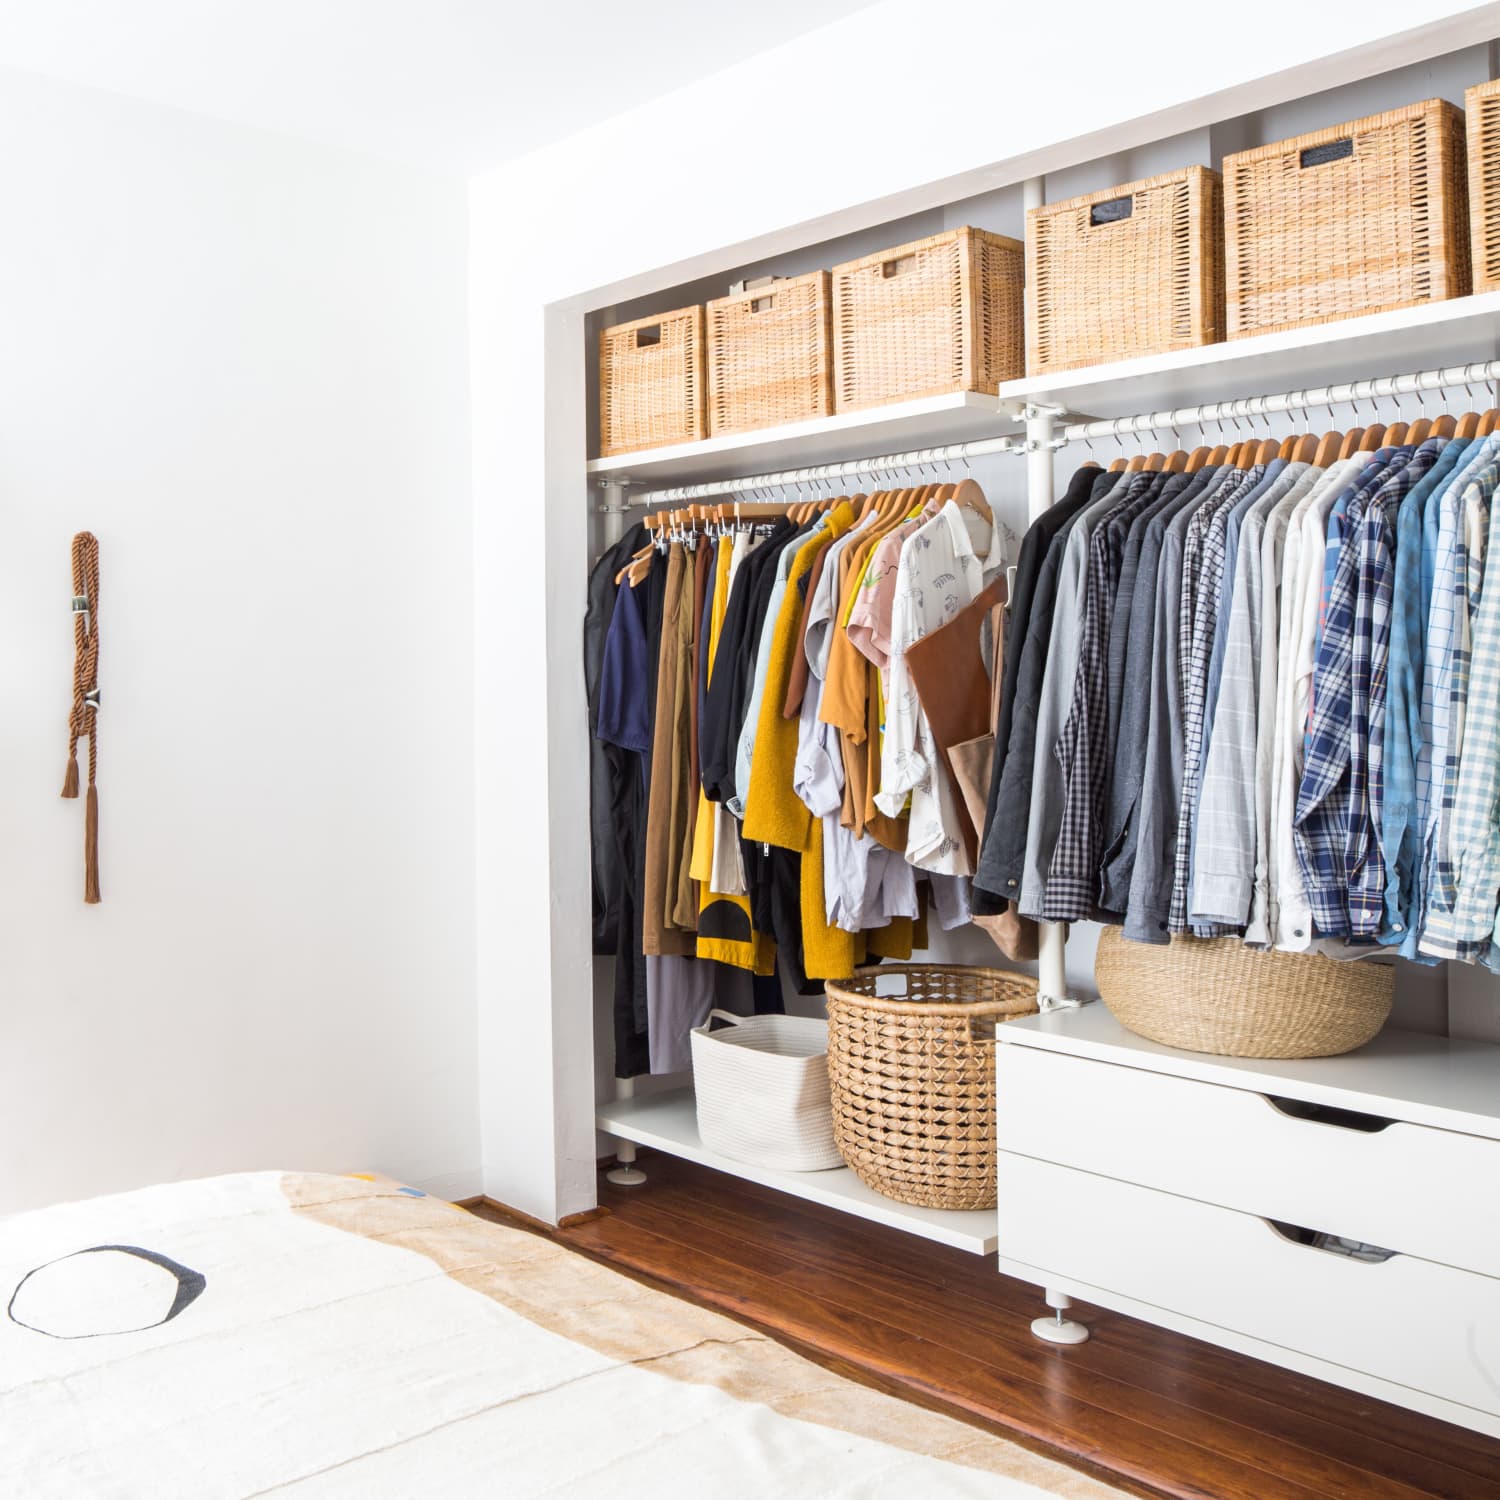 Closets to Go - The Do-It-Yourself Closet Experts